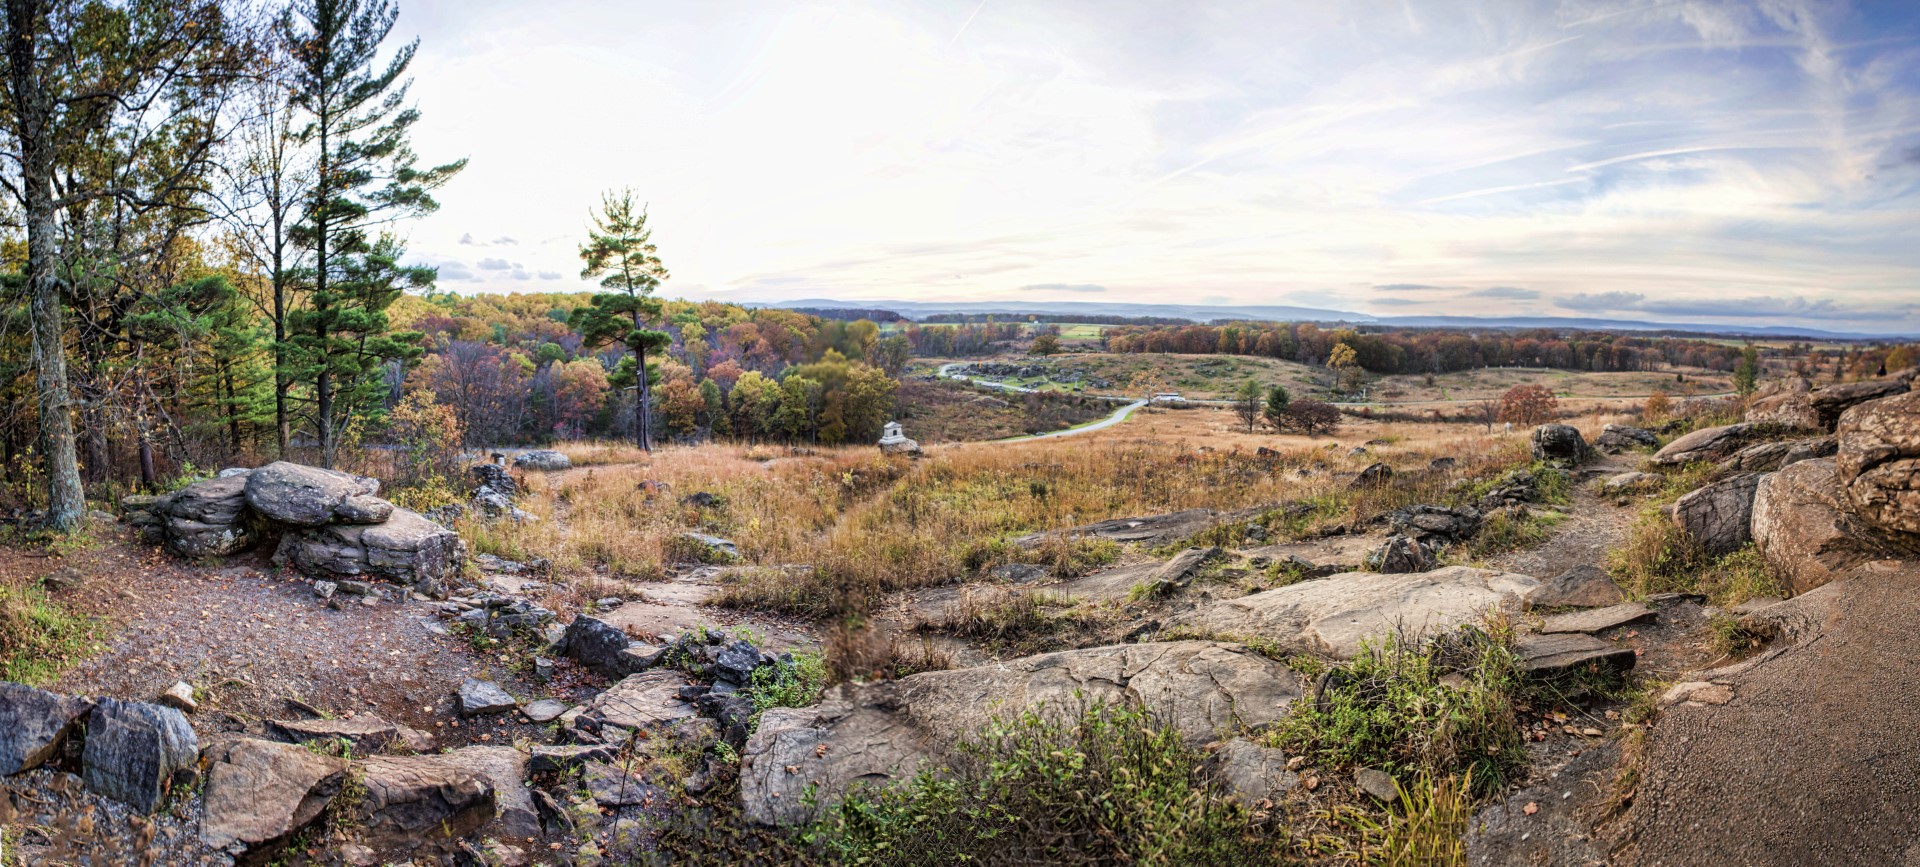 The view from the top of Little Round Top at the Gettysburg National Battlefield in Gettysburg Pennsylvania